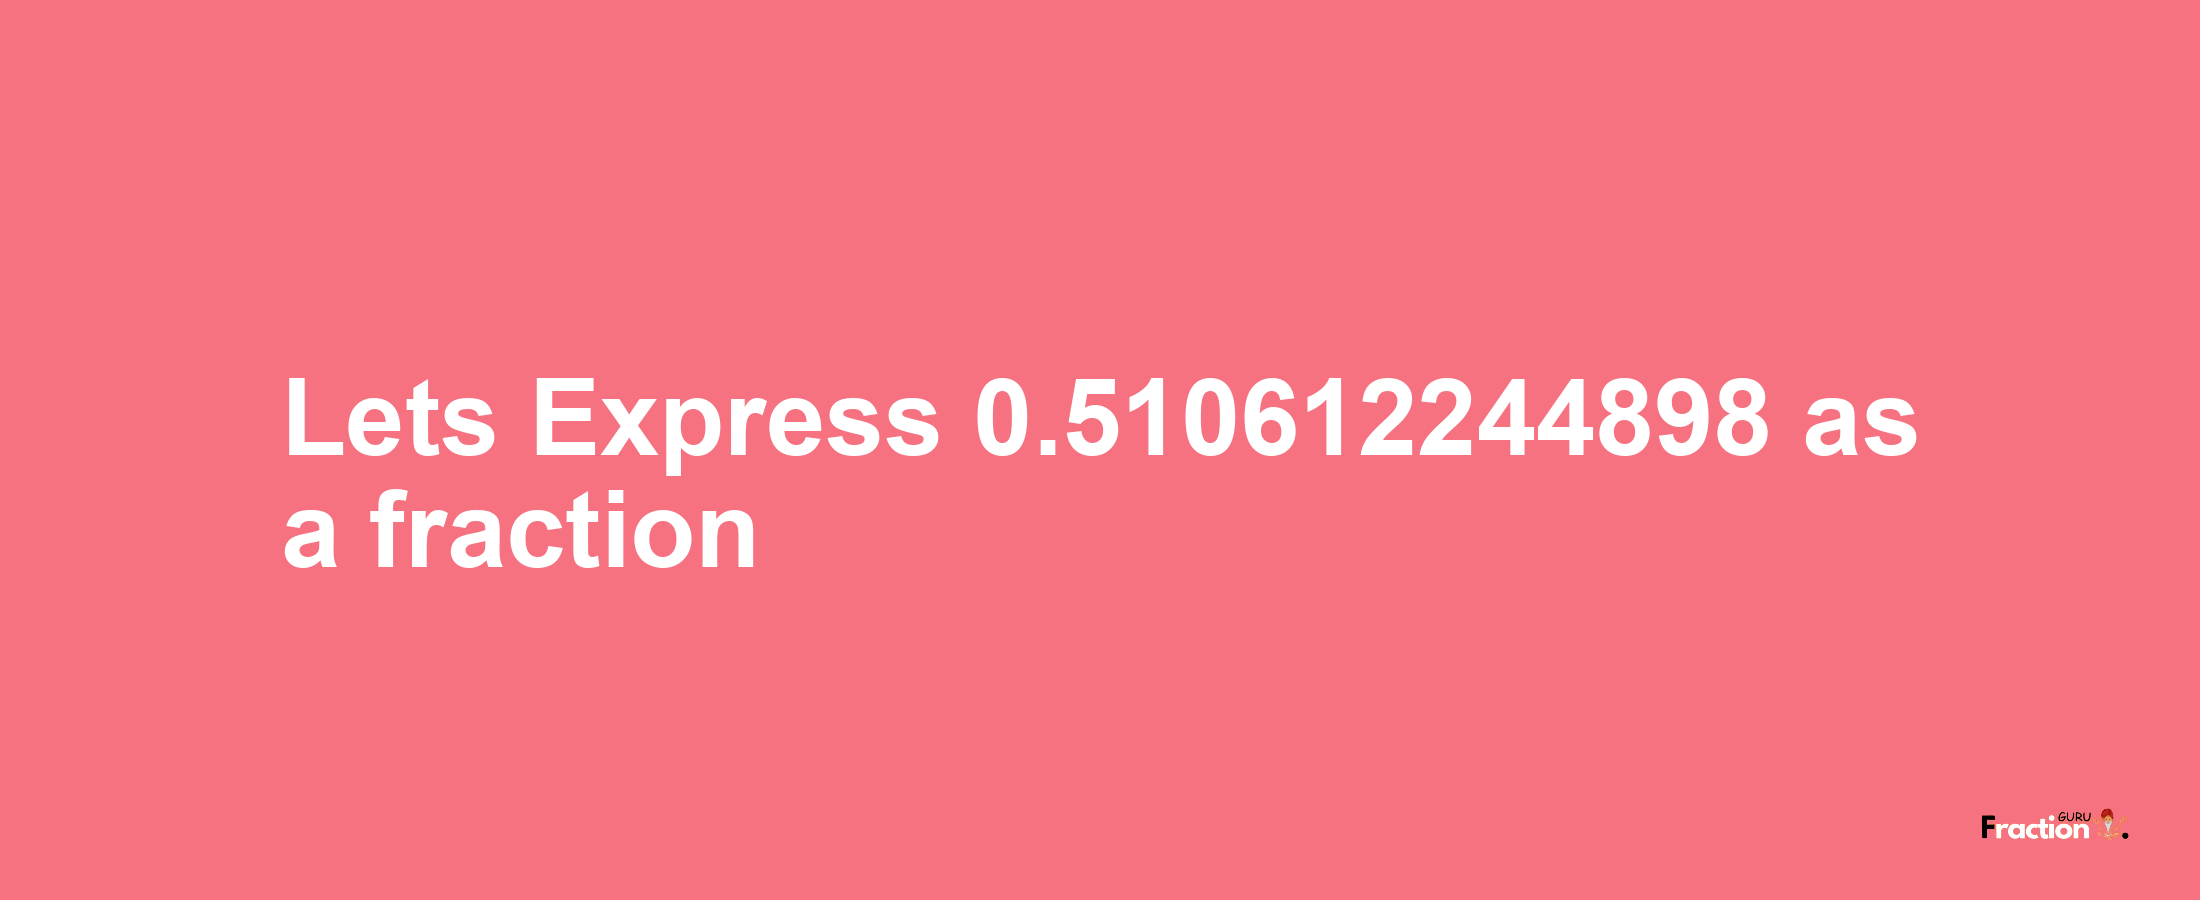 Lets Express 0.510612244898 as afraction